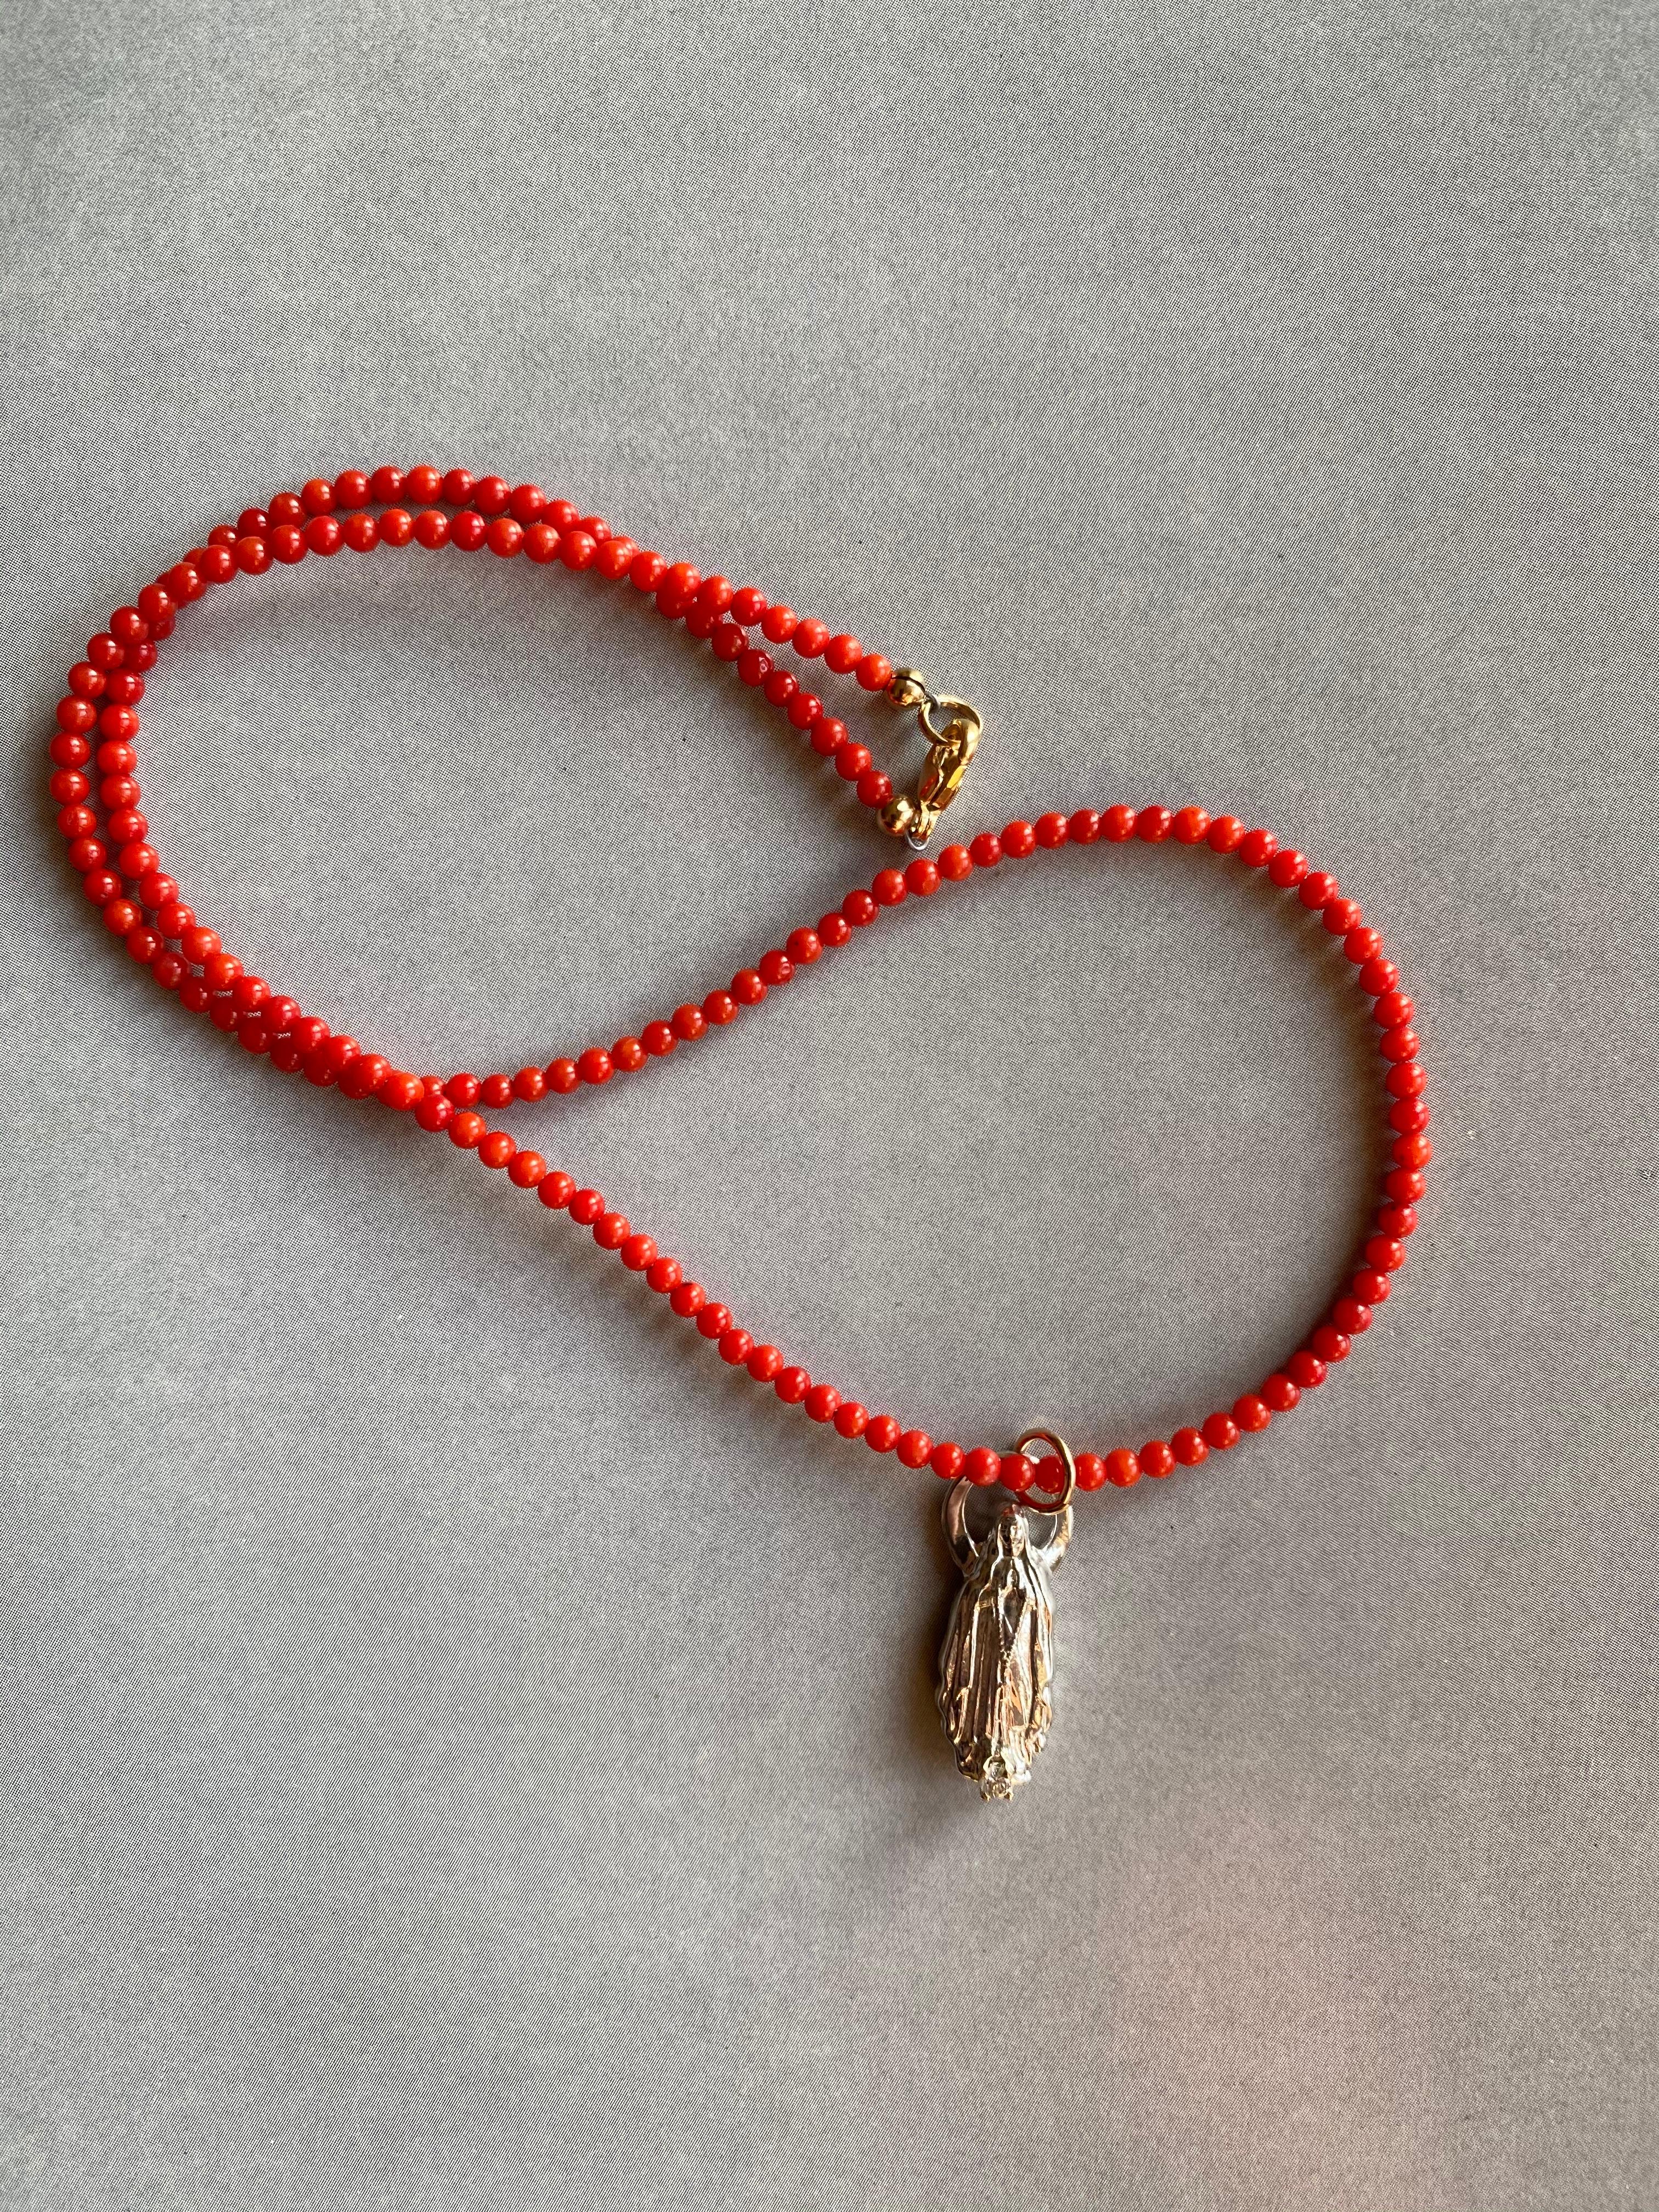 White Diamond Virgin Mary Medal silver Red Coral Bead Choker Necklace J Dauphin

Exclusive piece with Virgin Mary Medal with a White Diamond set in a gold prong. Bead Necklace is 16' long but can be made shorter or longer on request.

Made in Los